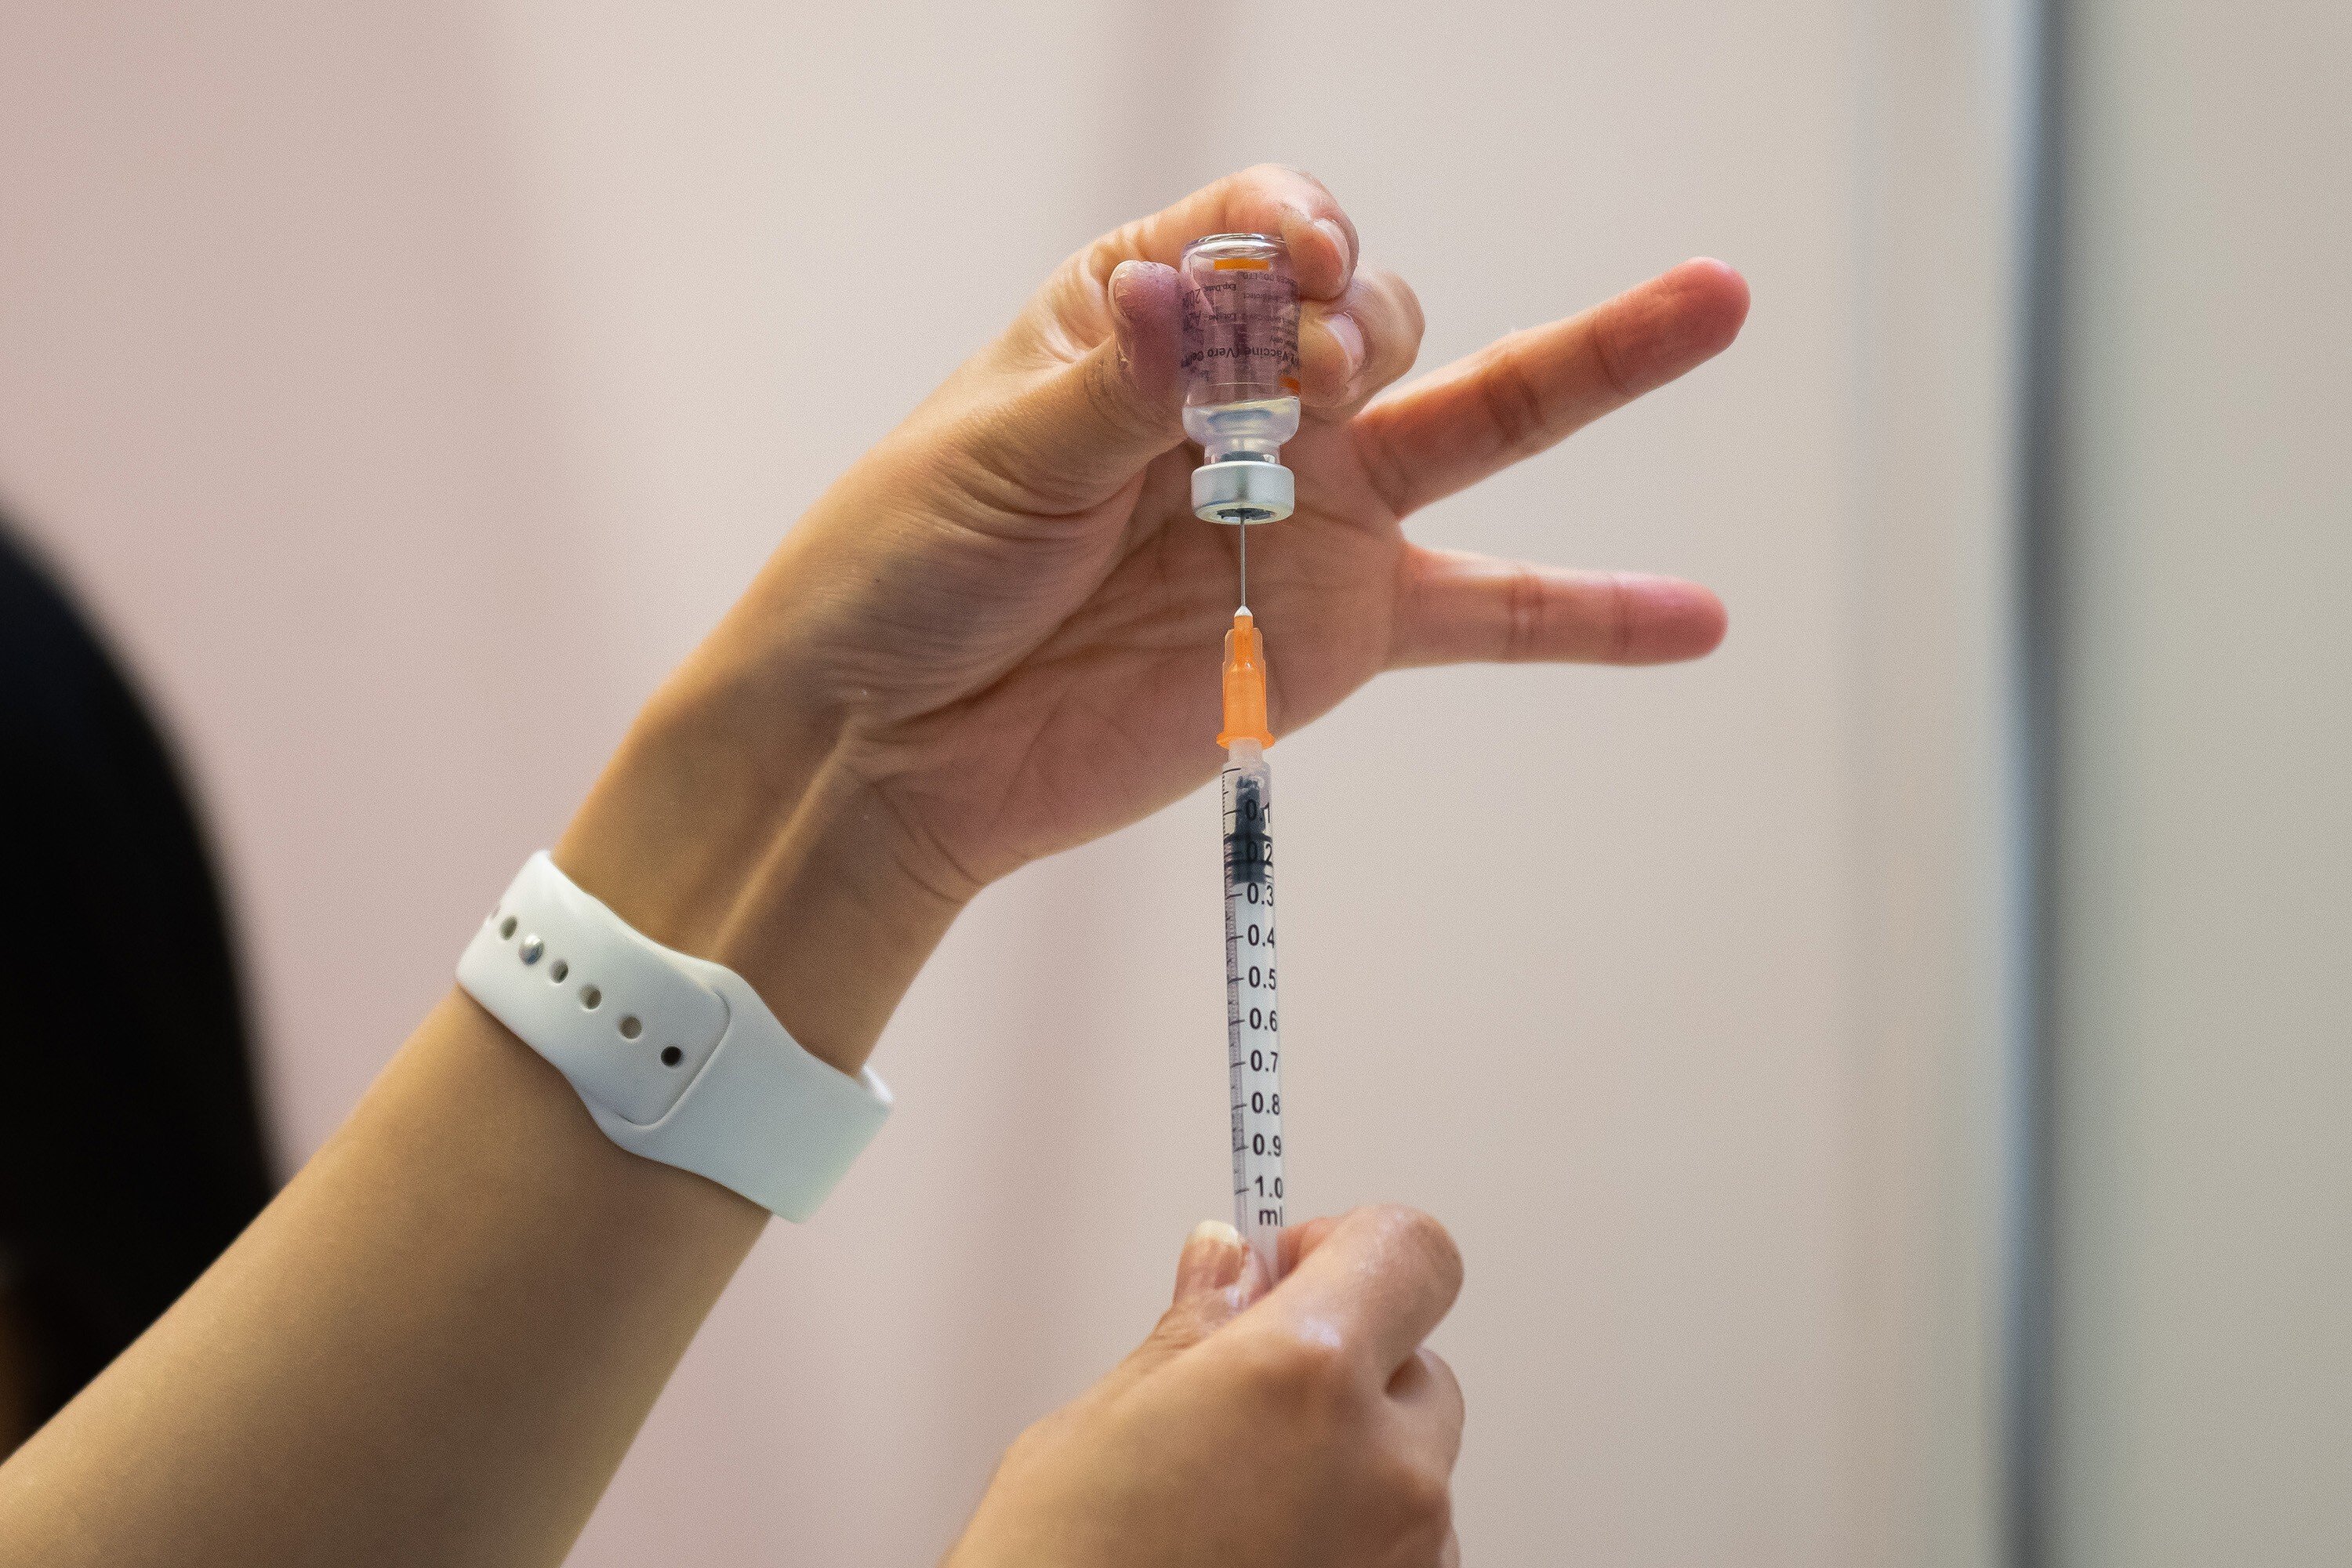 A nurse fills a syringe with a dose of Covid-19 vaccine at a community vaccination centre in Hong Kong. Photo: Billy H.C. Kwok/Getty Images/TNS